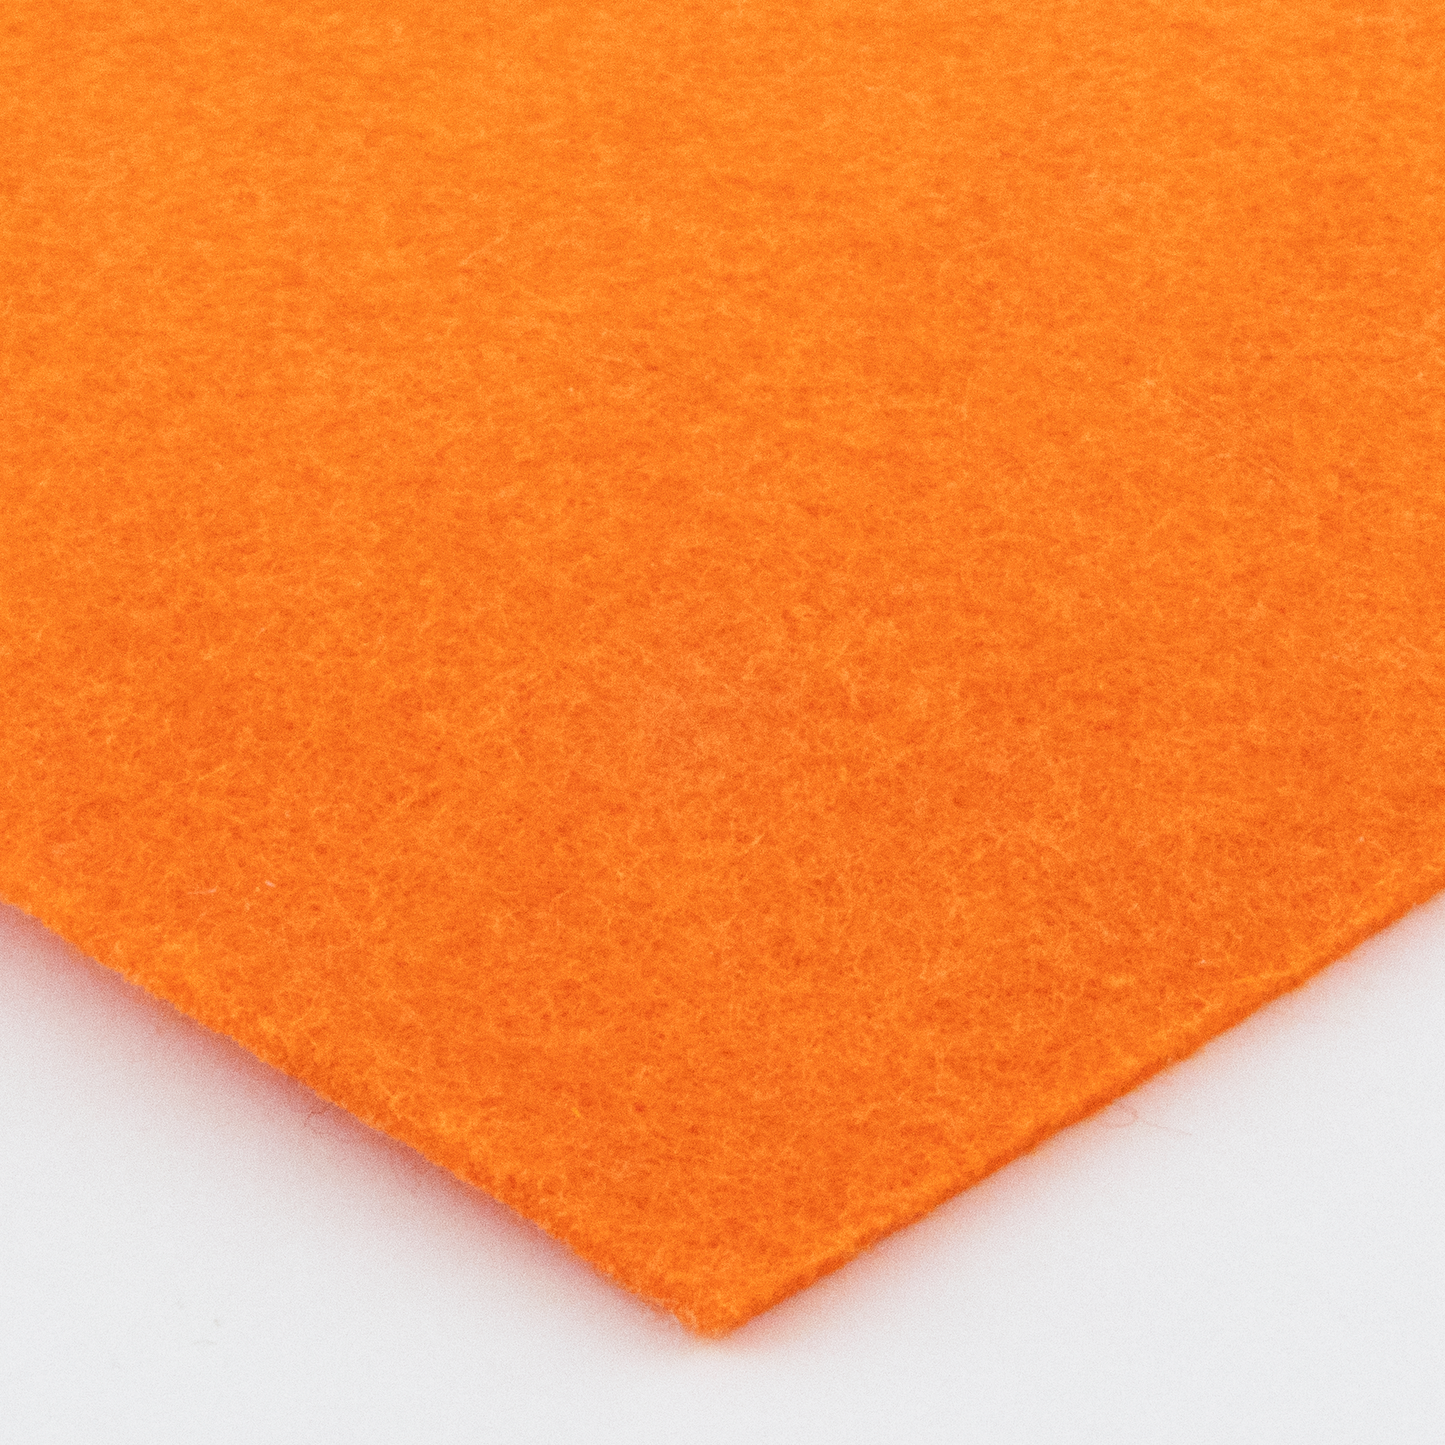 Patch Felt - 2mm Polyester Convenience Cut (8.5x10.5' Approx Letter Size)